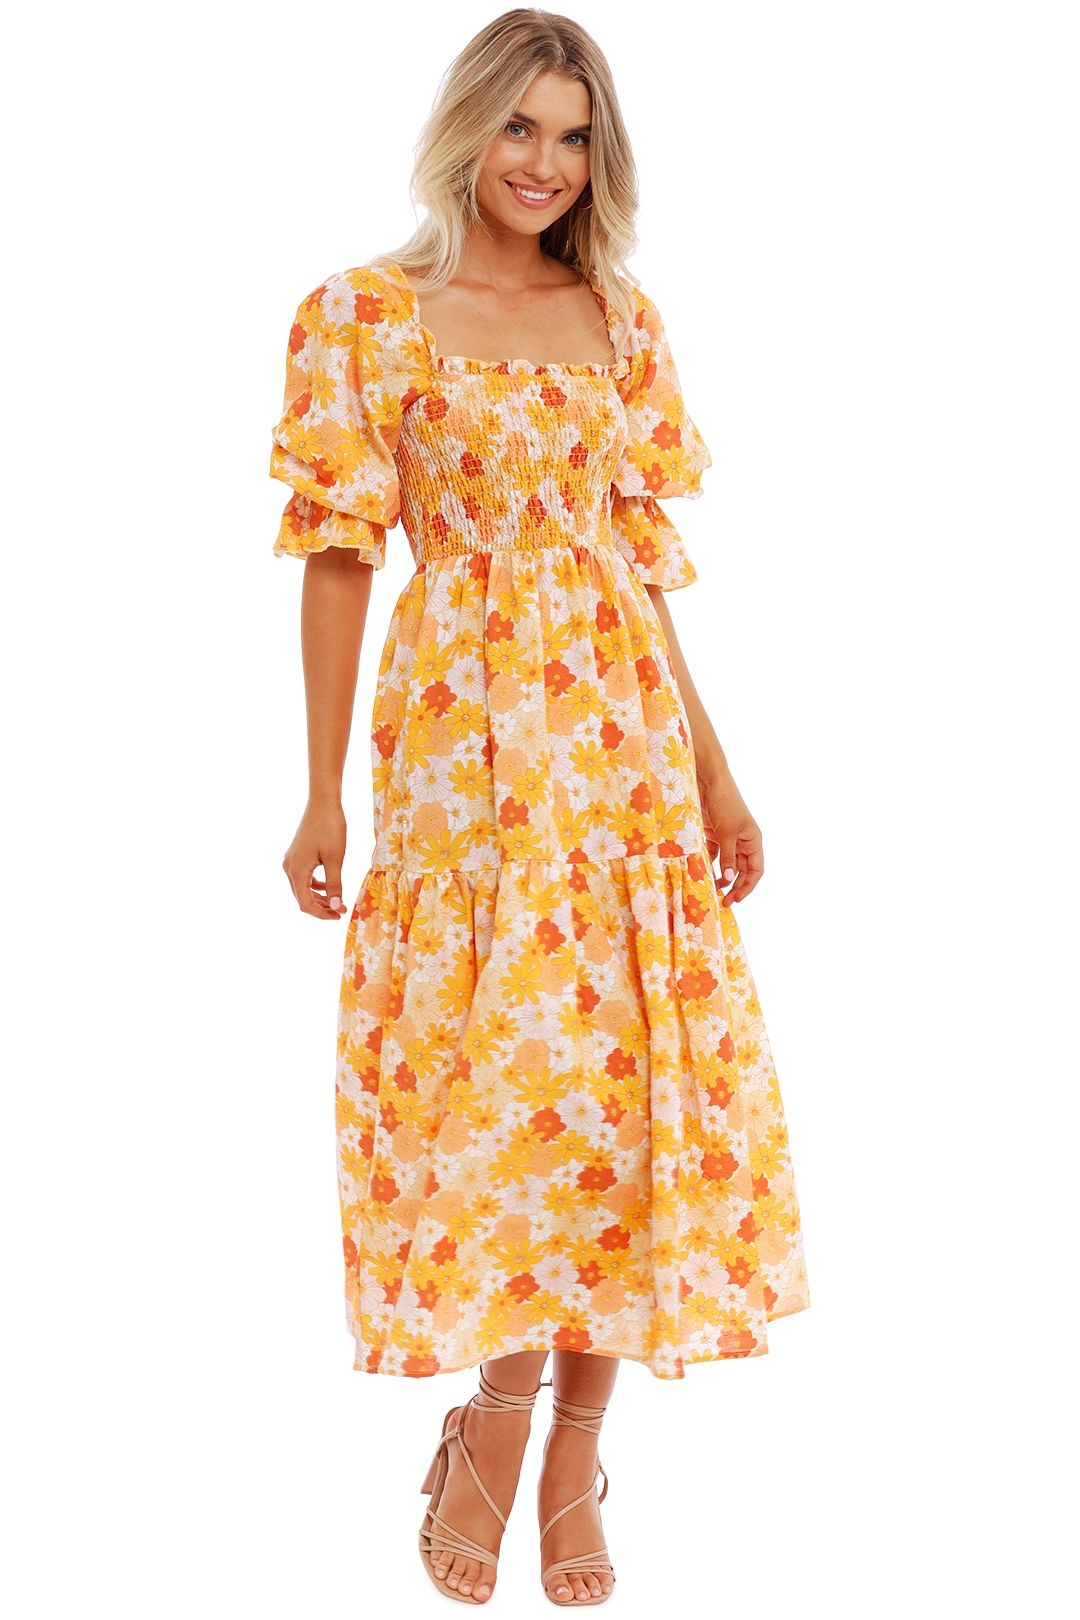 Charlie Holiday Amber Dress Seventies Floral midi